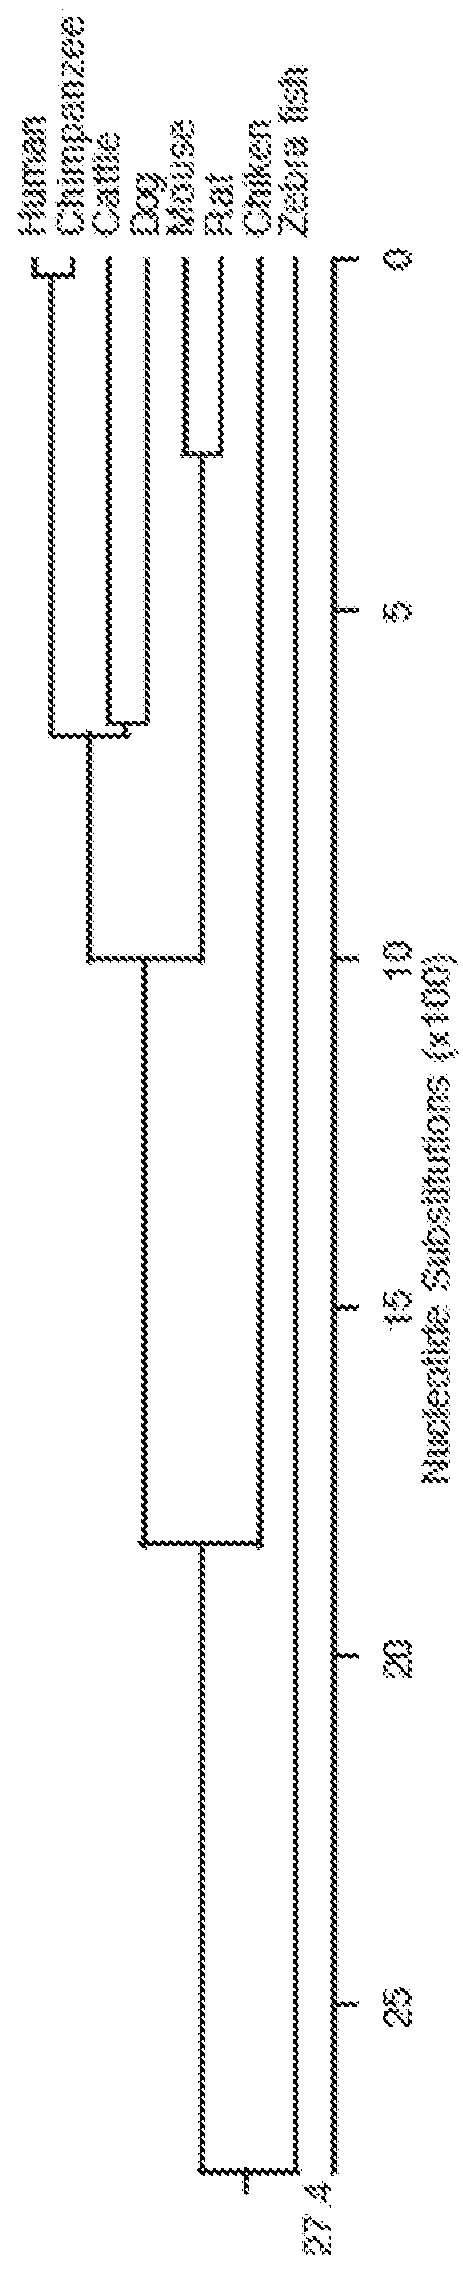 Cancer Vaccines And Methods Of Treatment Using The Same